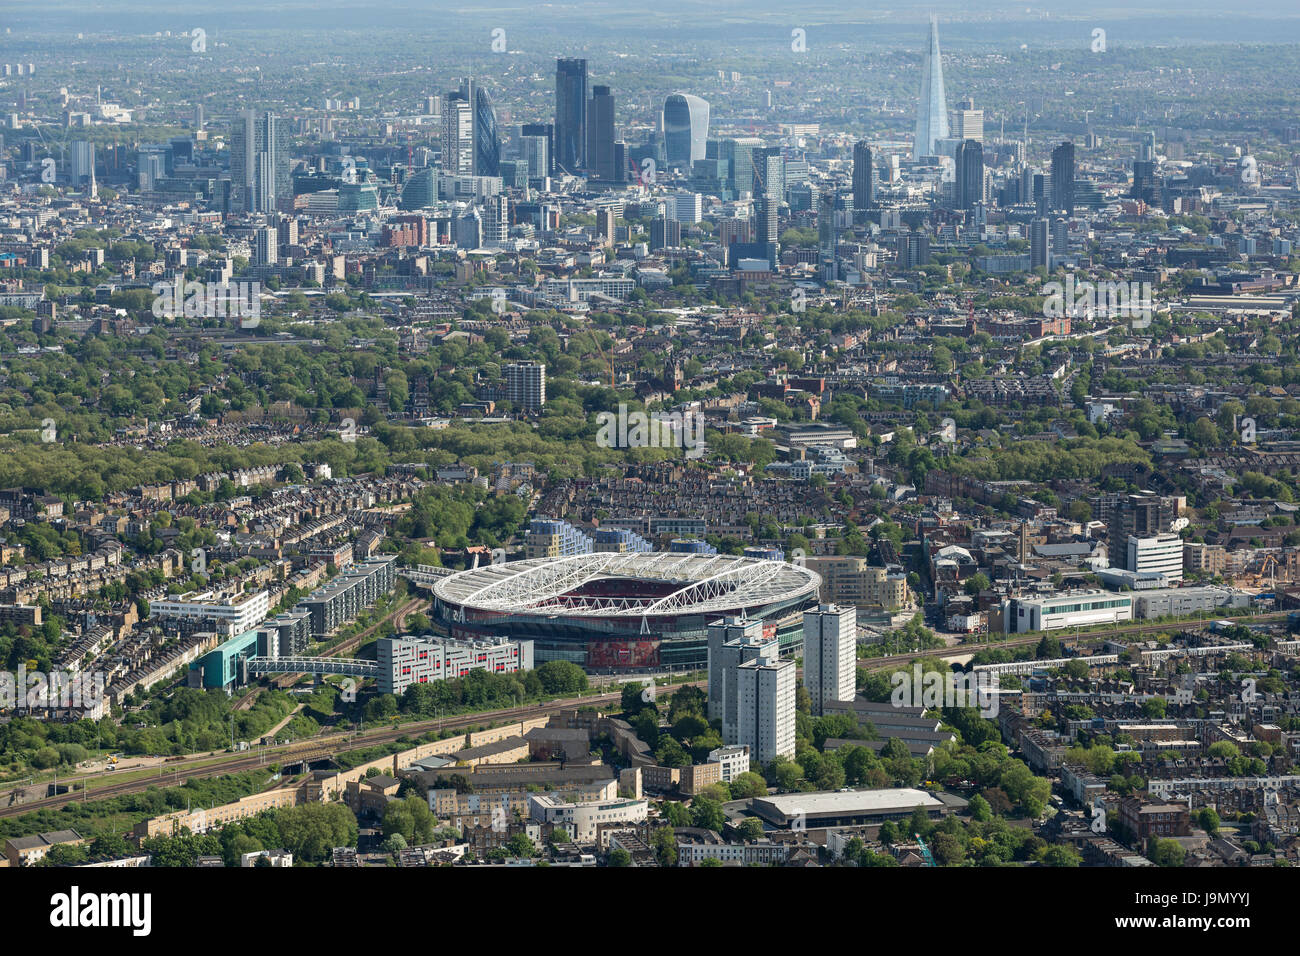 The Emirates Stadium in Highbury, London, England, the home of the Premier Leagues, Arsenal Football Club. Showing the London skyline beyond Stock Photo